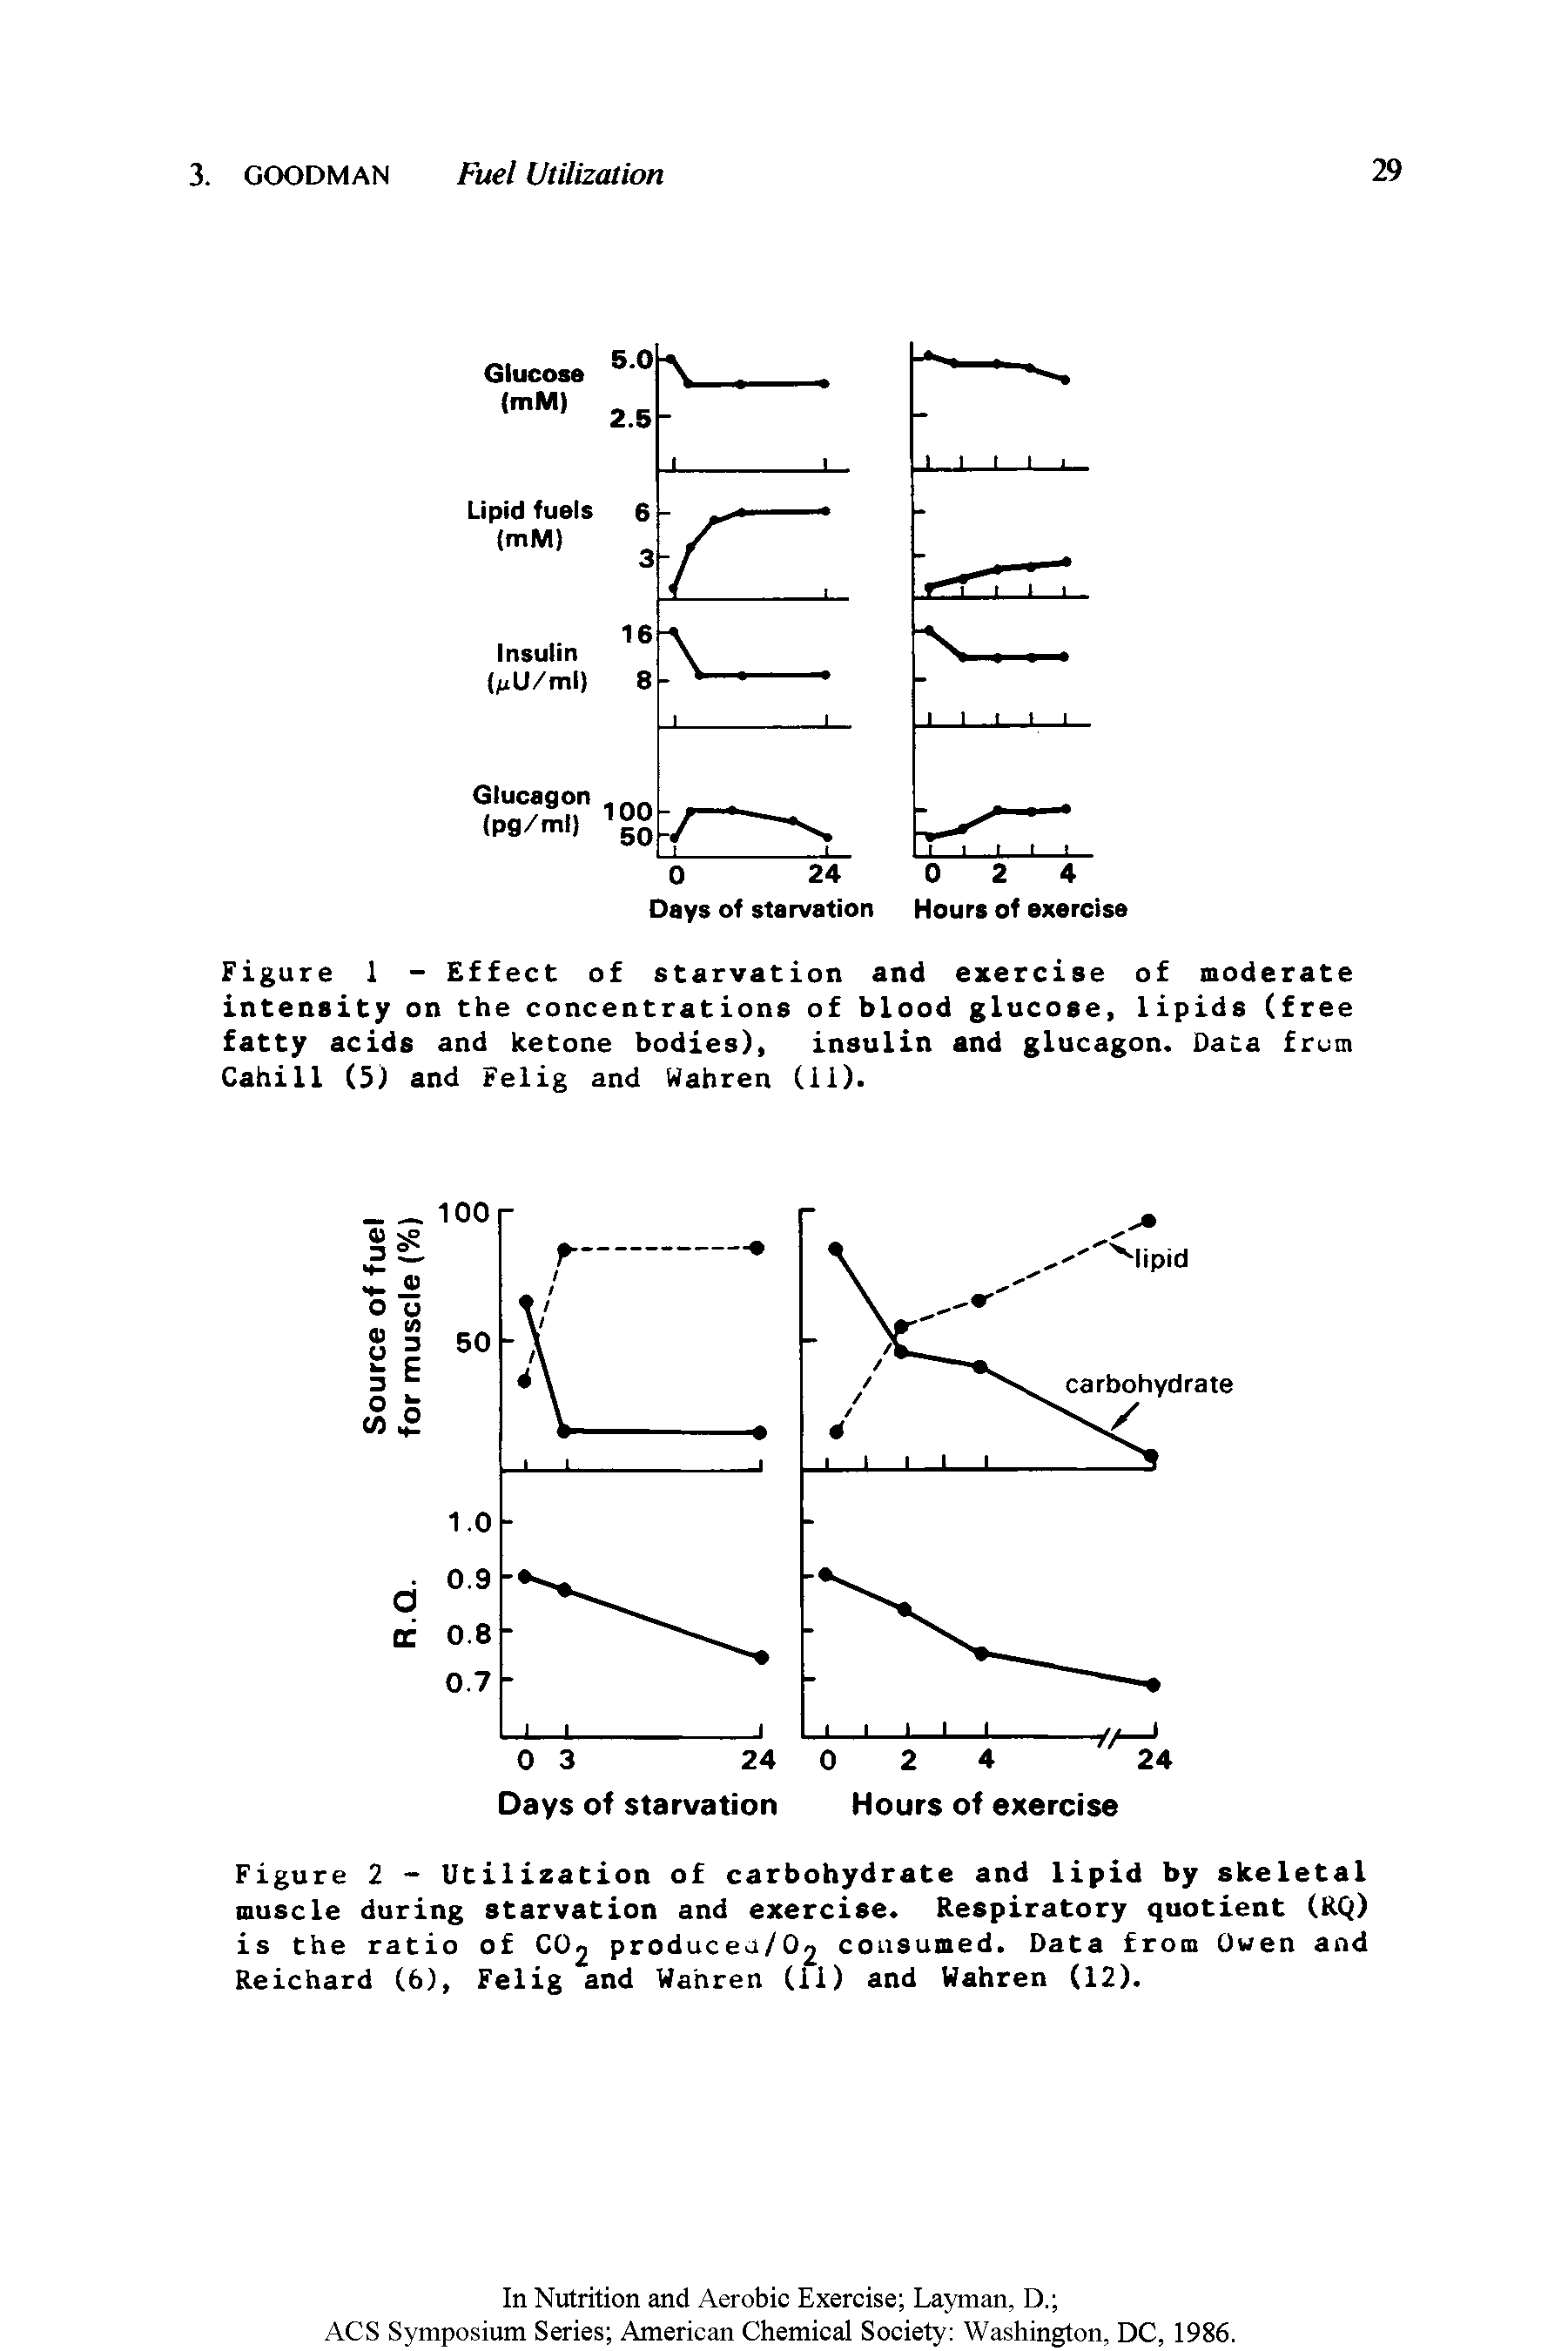 Figure 2 - Utilization of carbohydrate and lipid by skeletal muscle during starvation and exercise. Respiratory quotient (RQ) is the ratio of CO2 producea/02 consumed. Data from Owen and Reichard (6), Felig and Wahren (11) and Wahren (12).